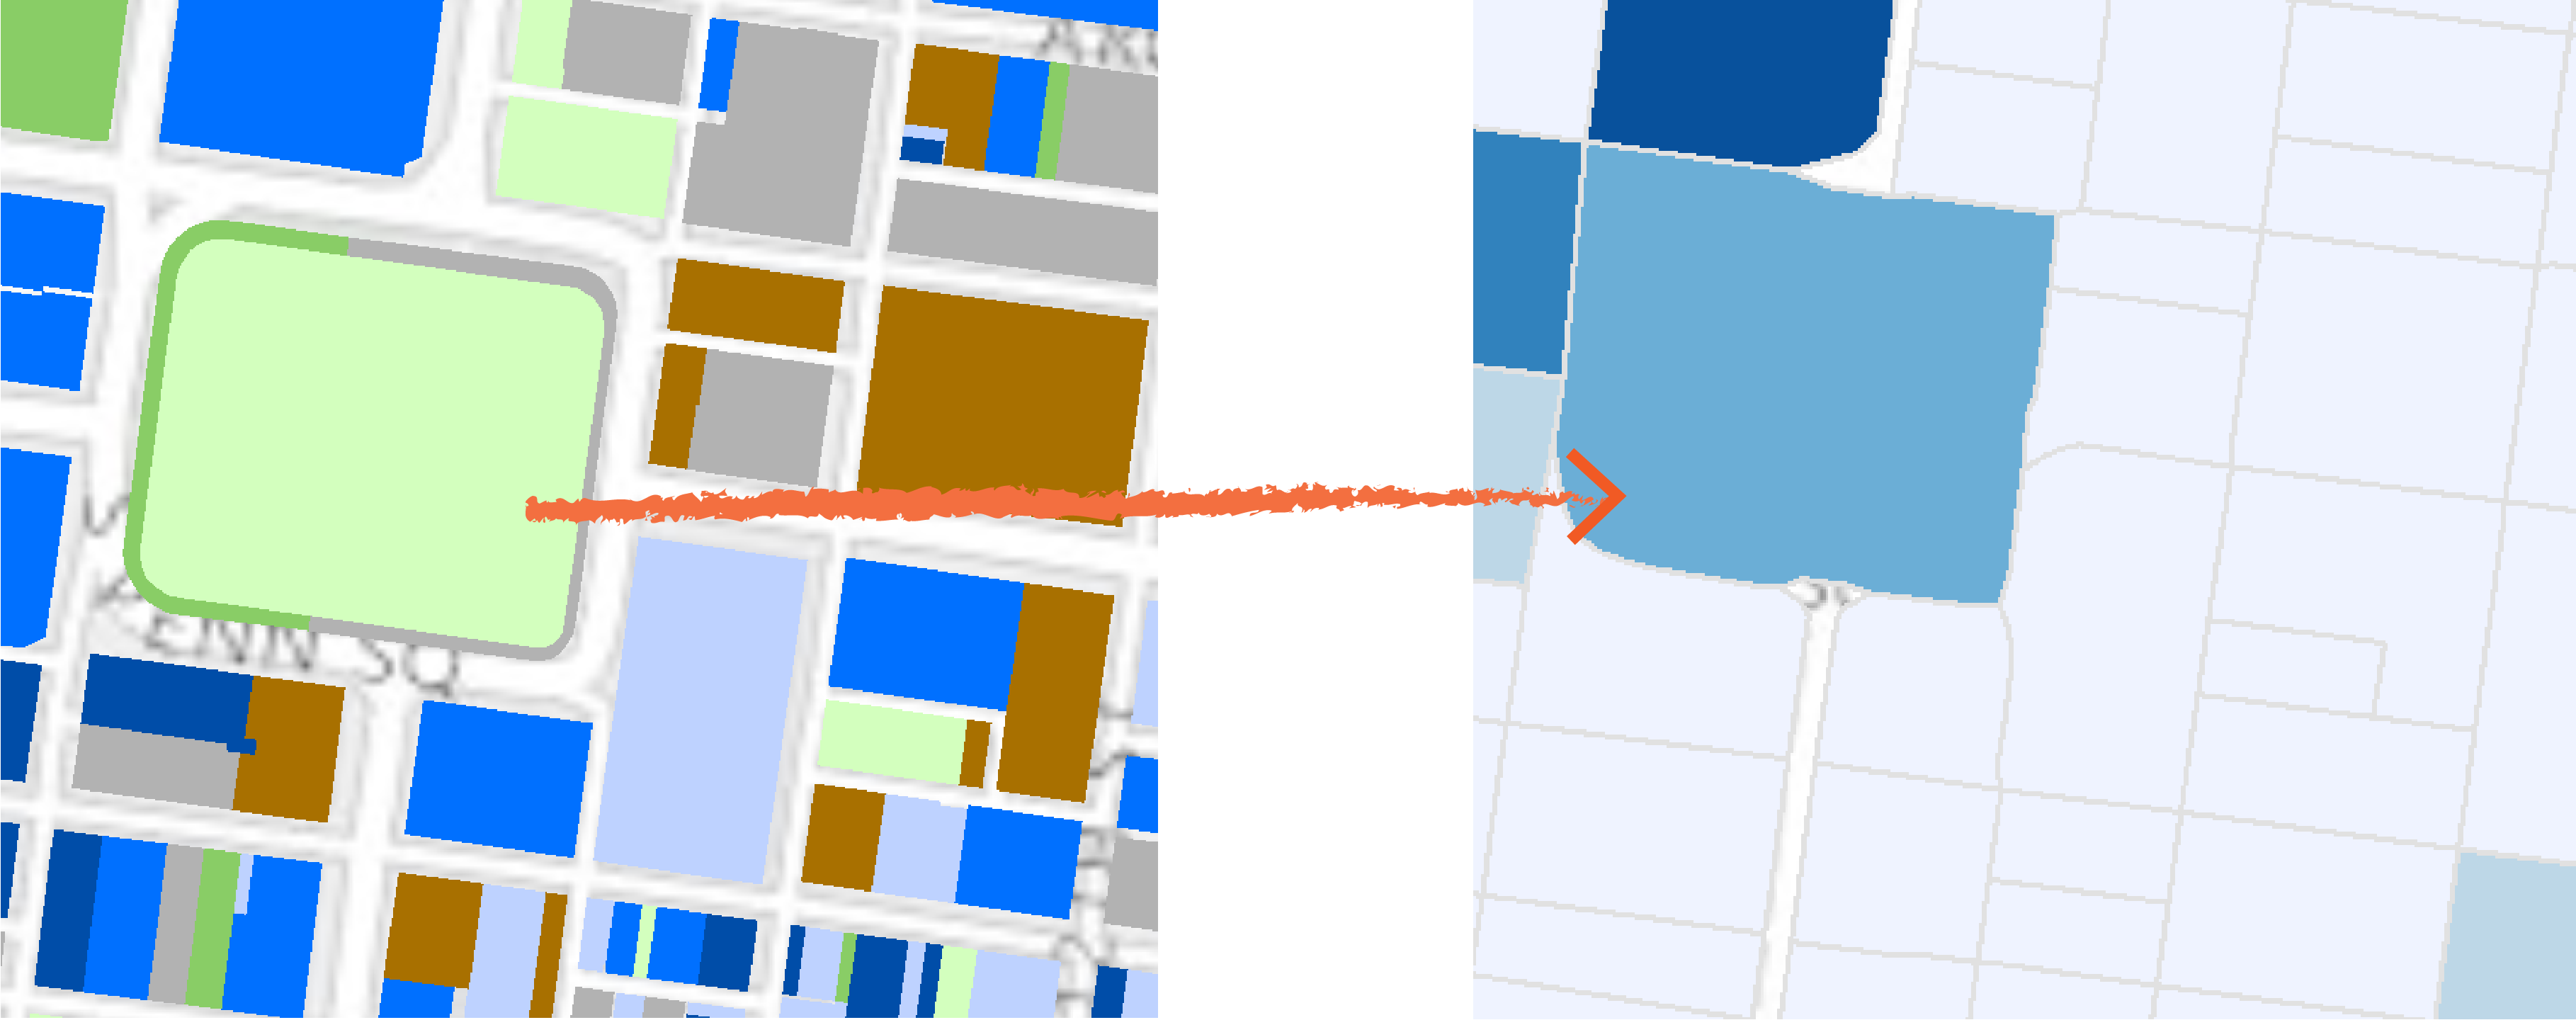 Land use can be easily aggregated to blocks